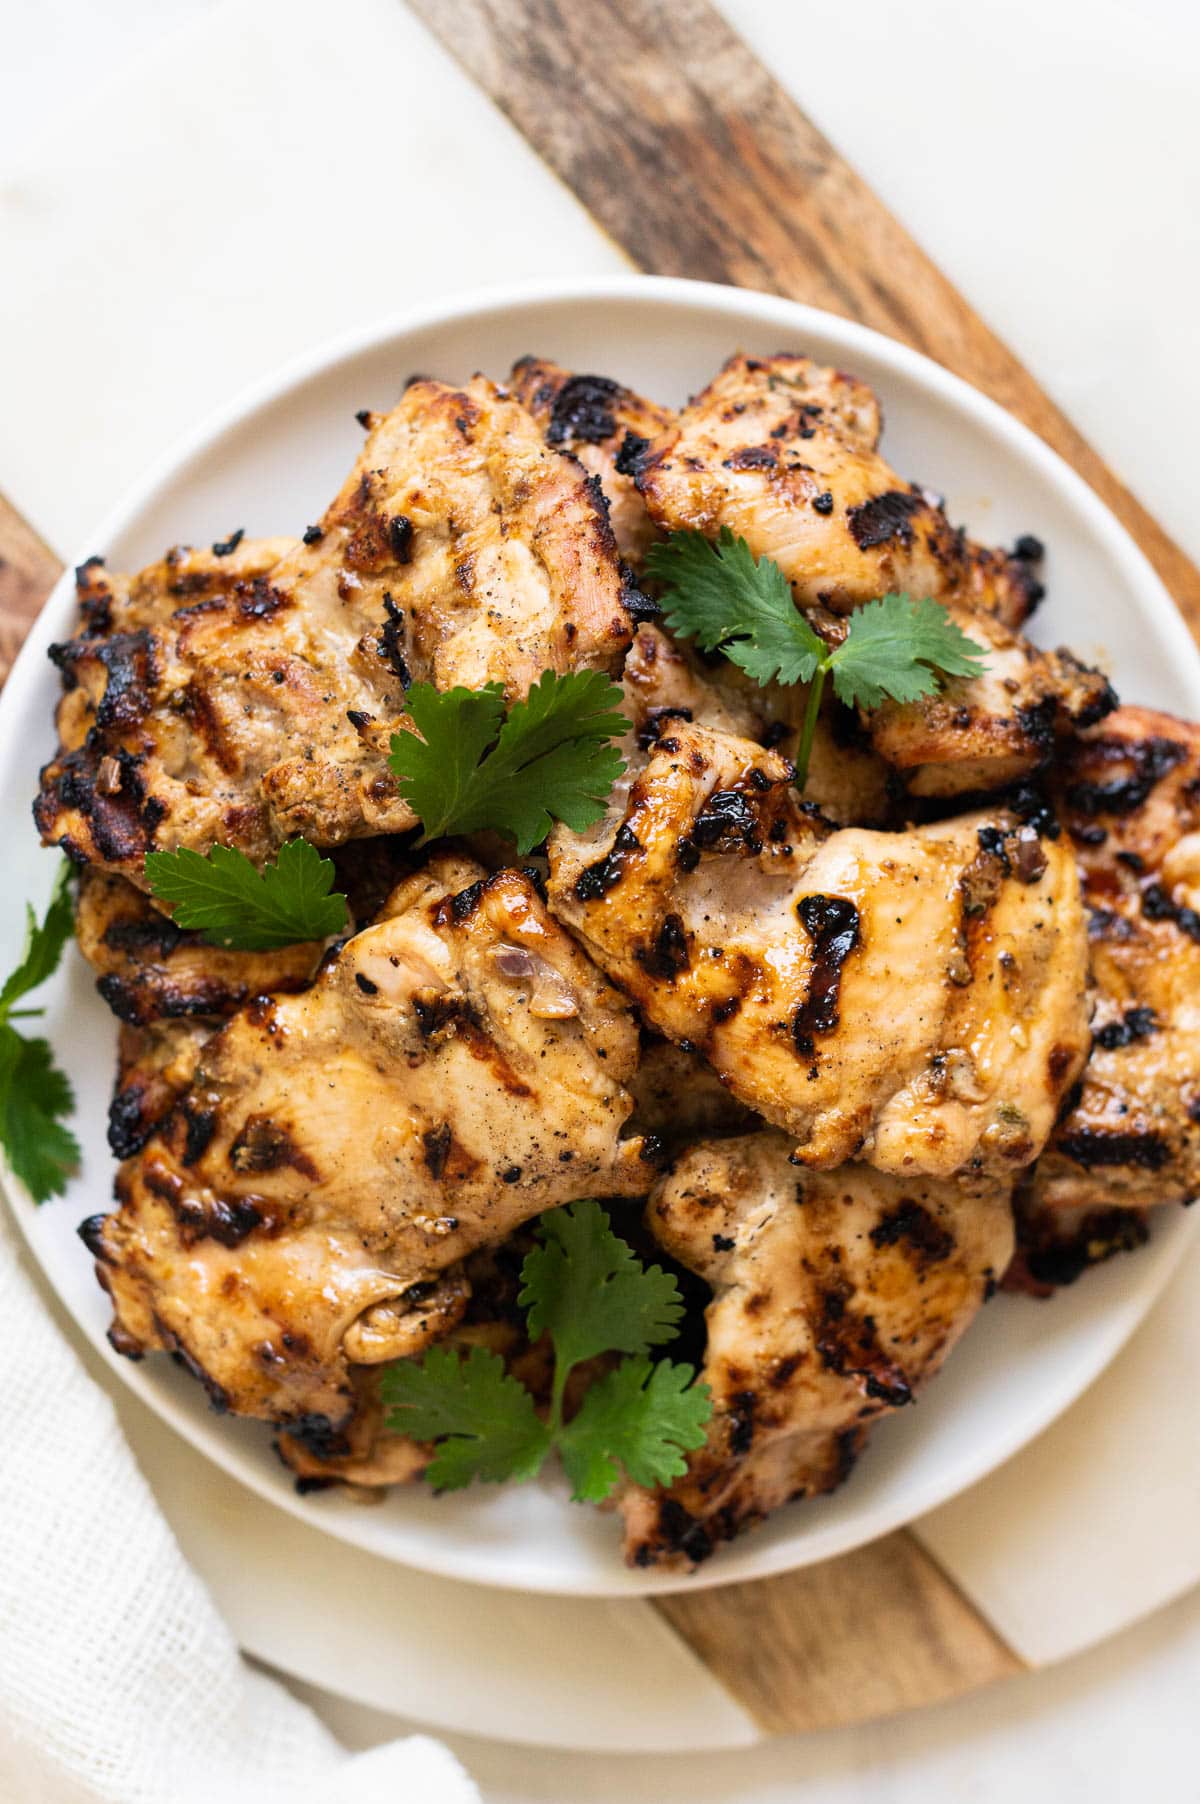 Grilled yogurt marinated chicken garnished with cilantro and served on a plate.